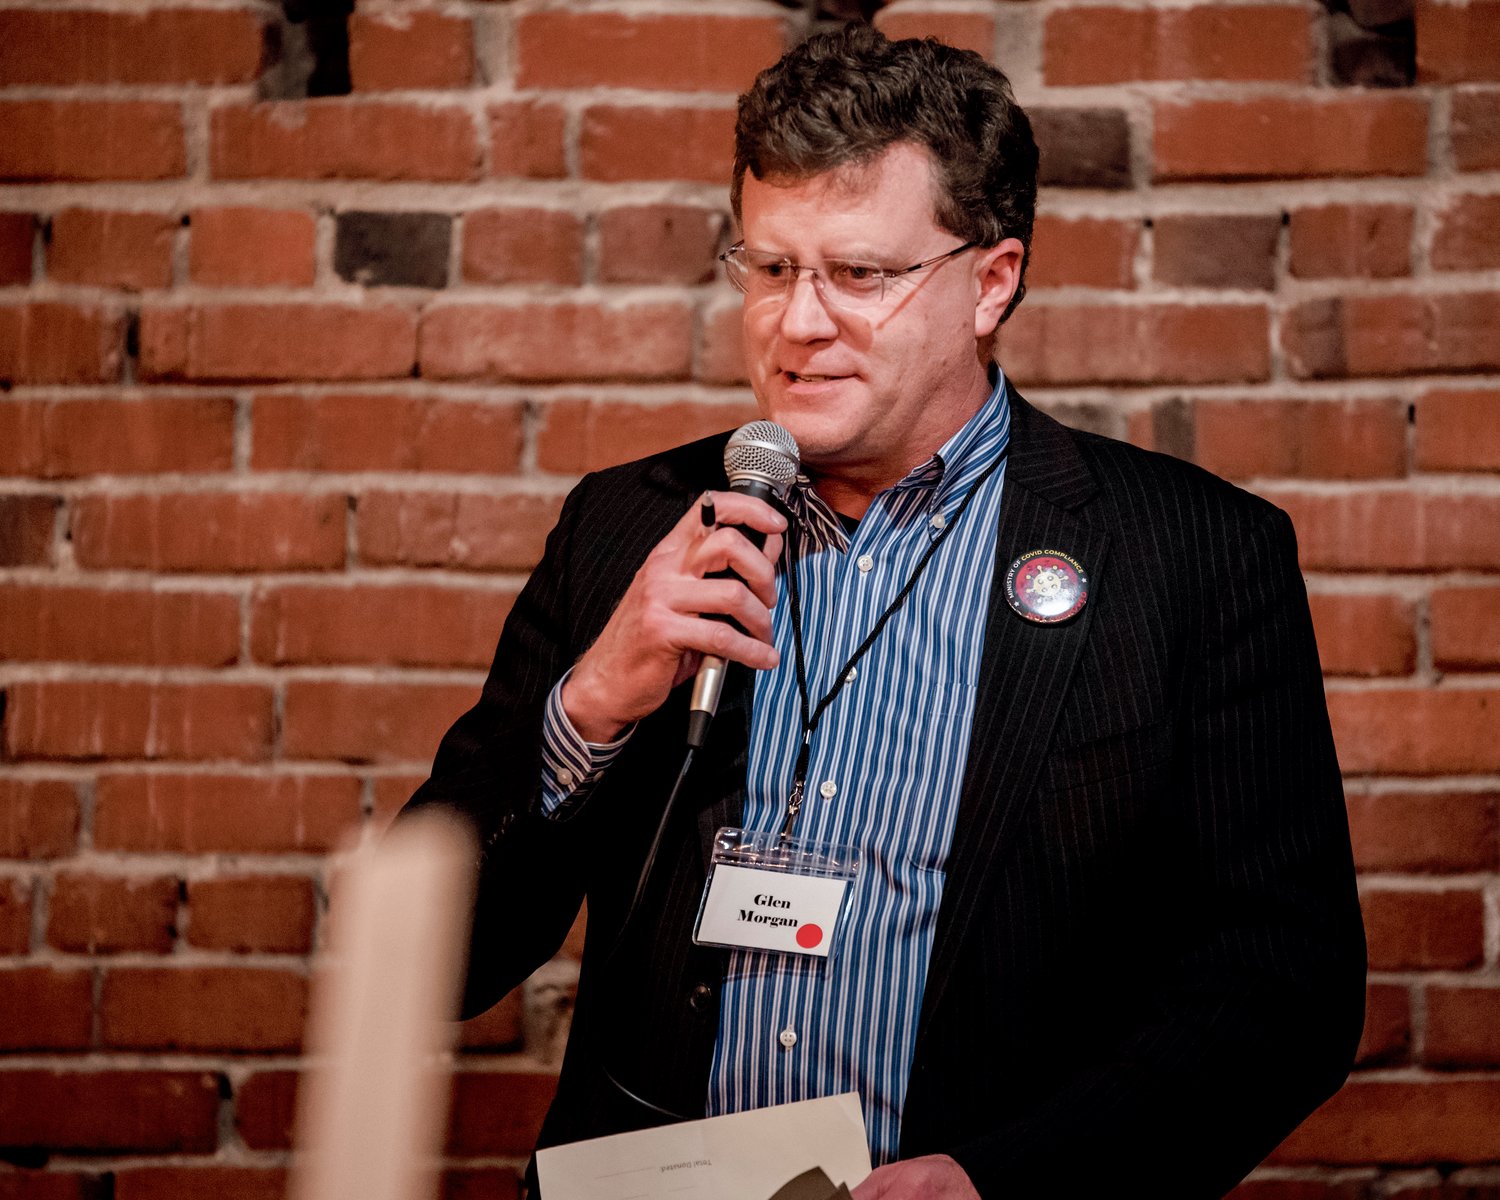 Glen Morgan uses a microphone to address attendees of the Lewis County Republicans' Lincoln Day Dinner in Chehalis in February.